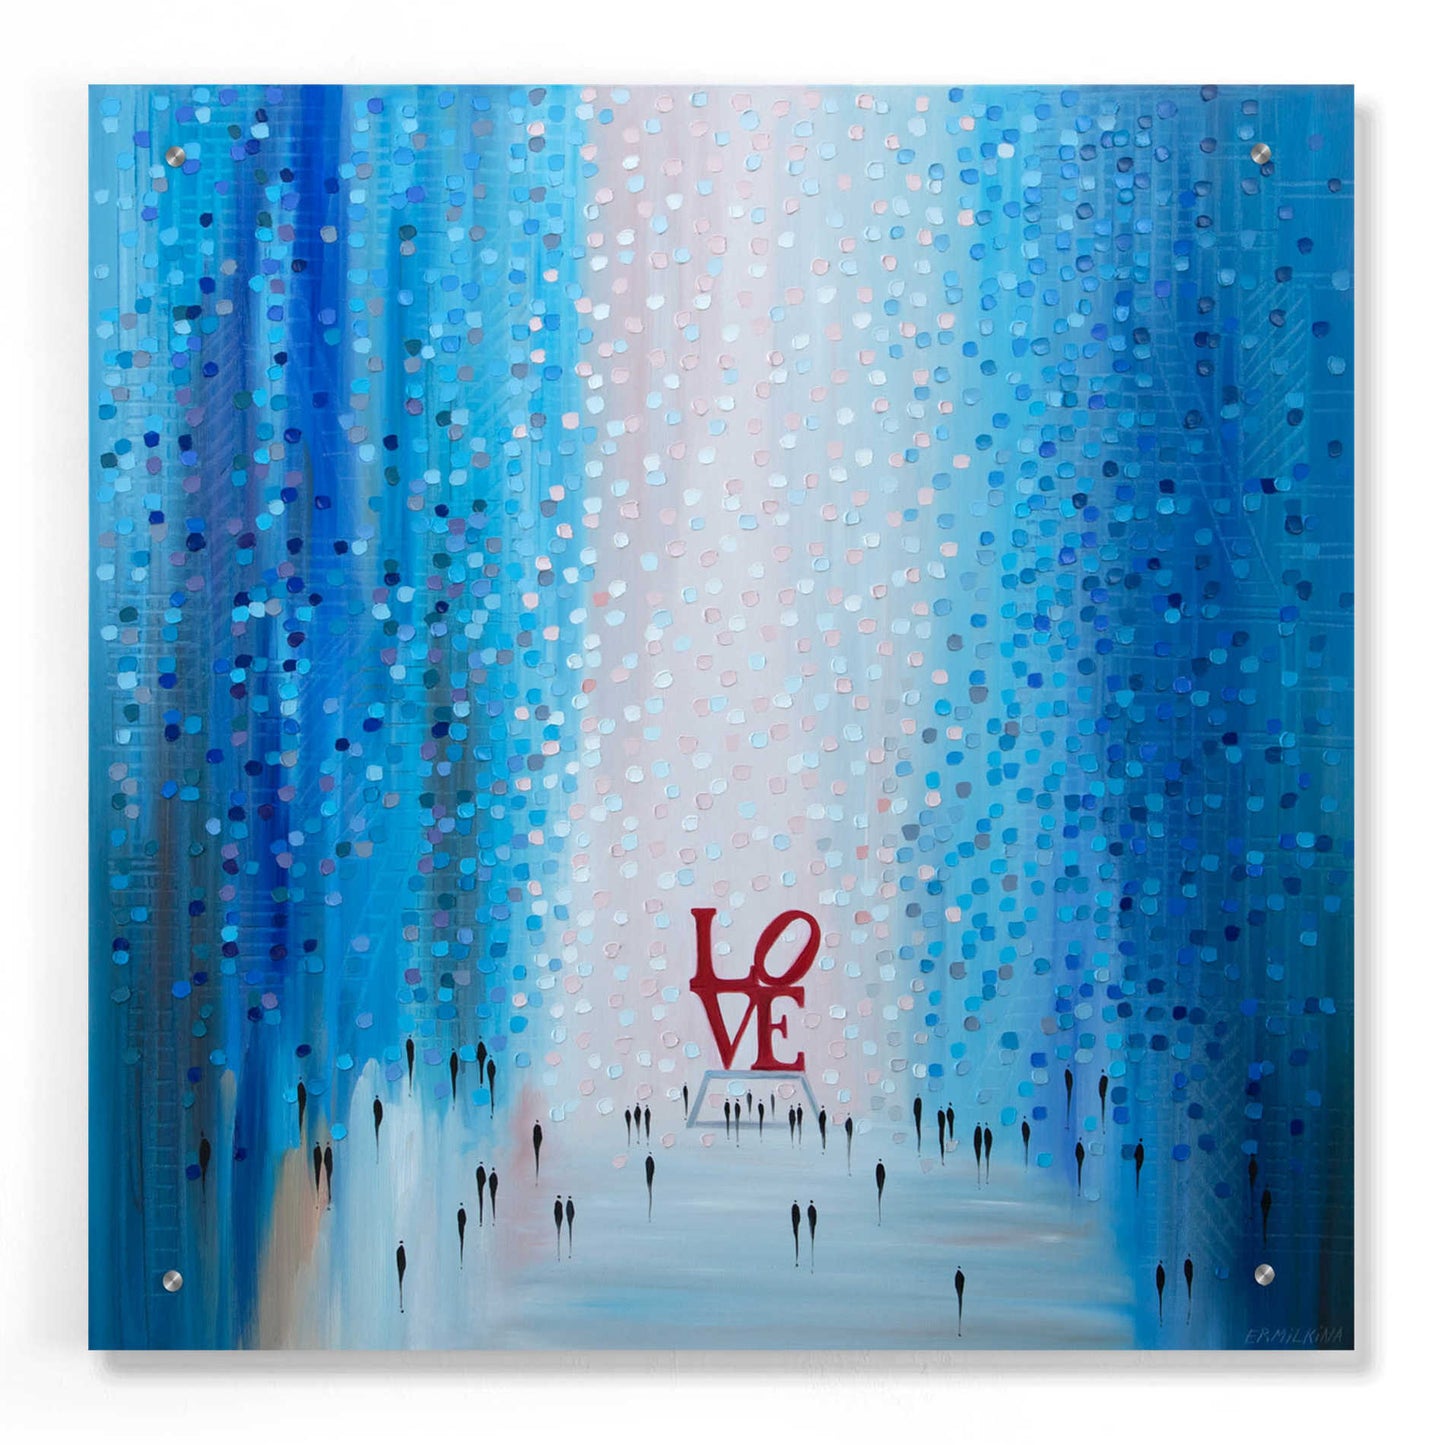 Epic Art 'In Love With You' by Ekaterina Ermilkina, Acrylic Glass Wall Art,24x24